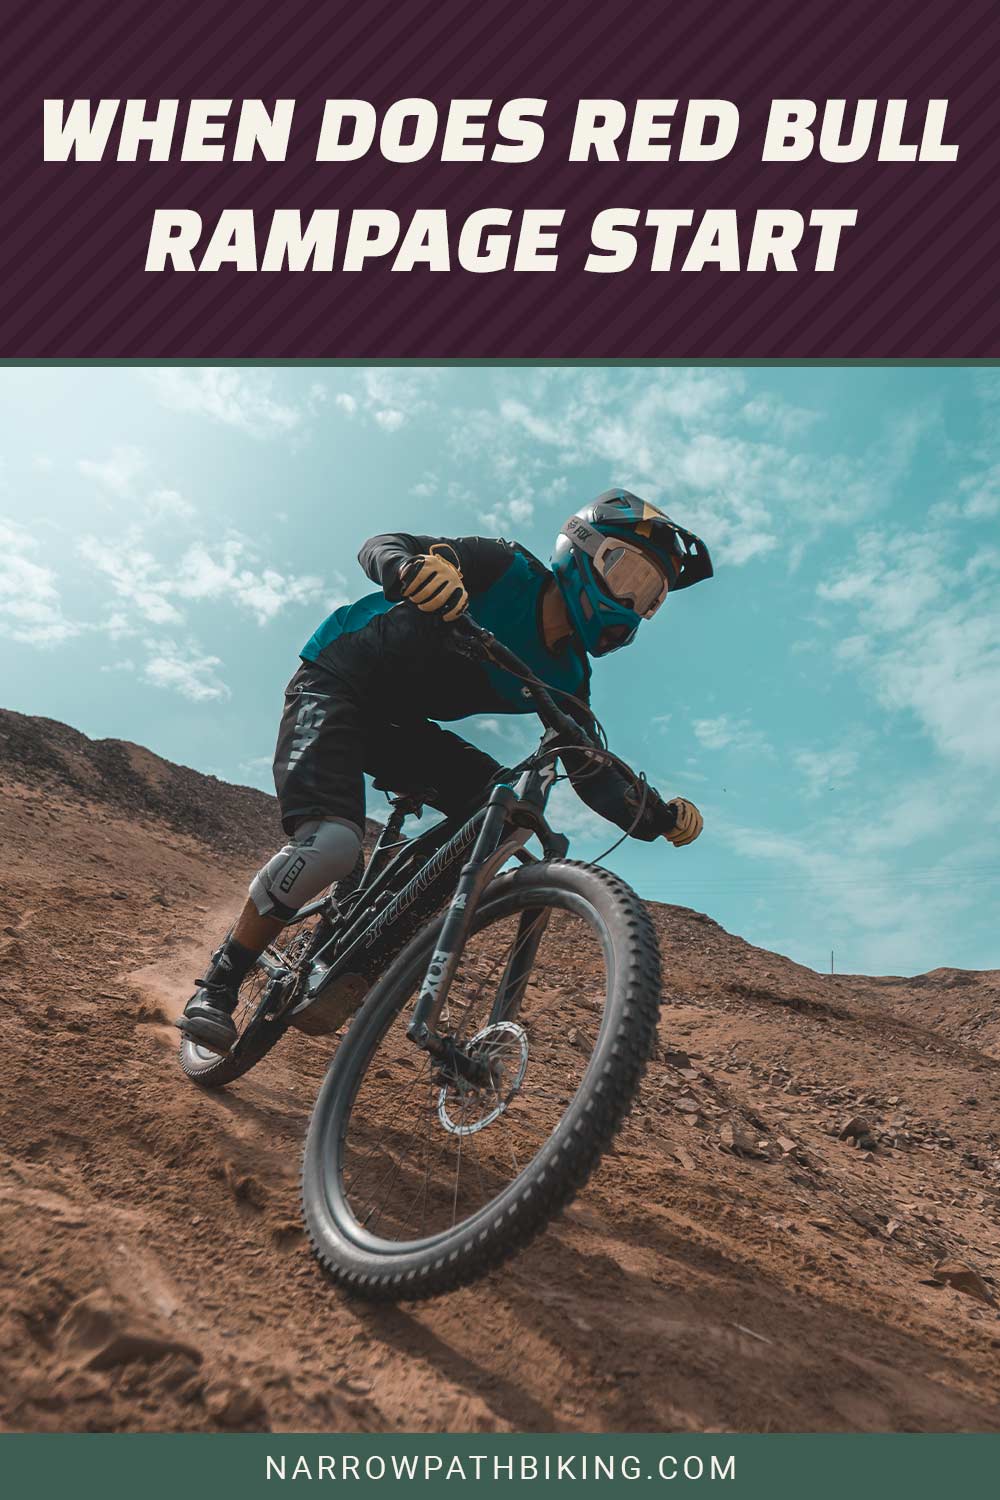 When Does Red Bull Rampage Start?